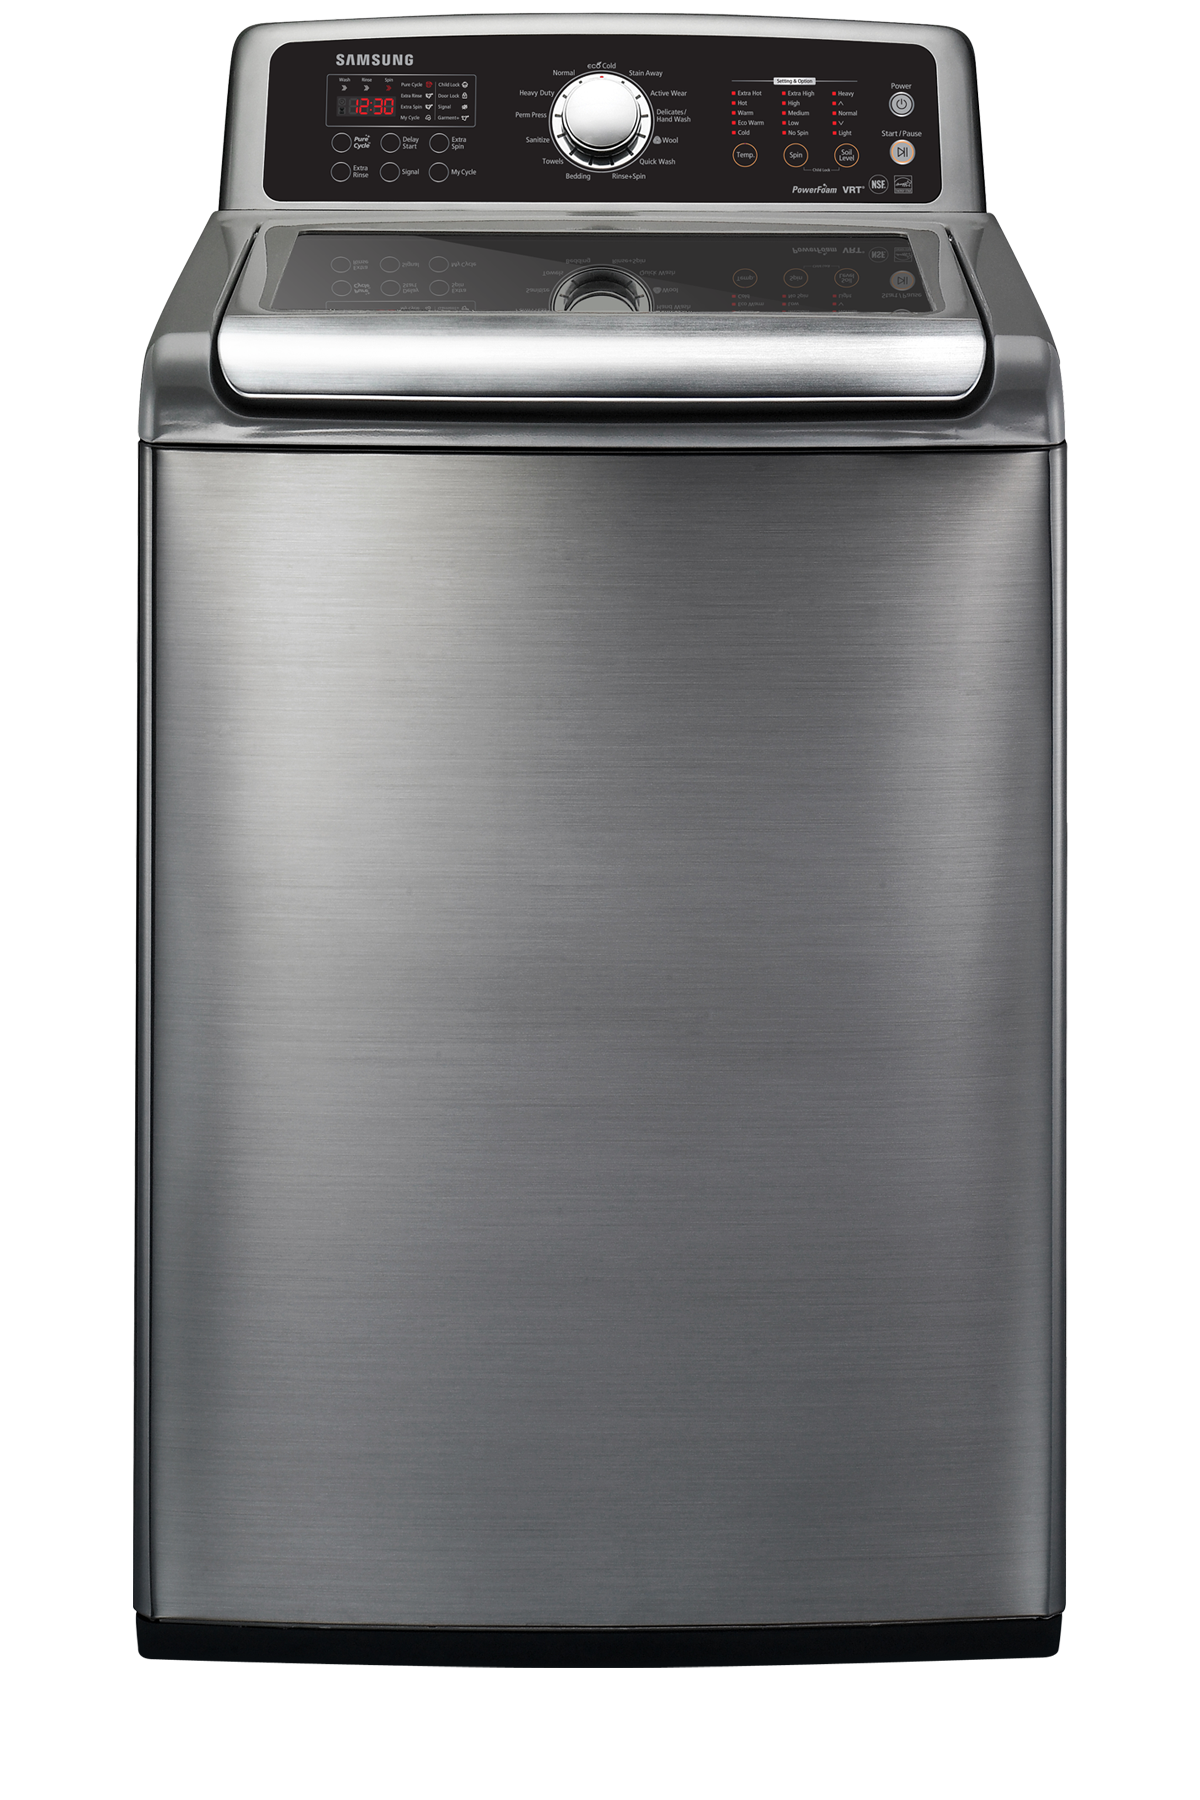 wa5471abp-5-4-cu-ft-top-load-washer-stainless-platinum-samsung